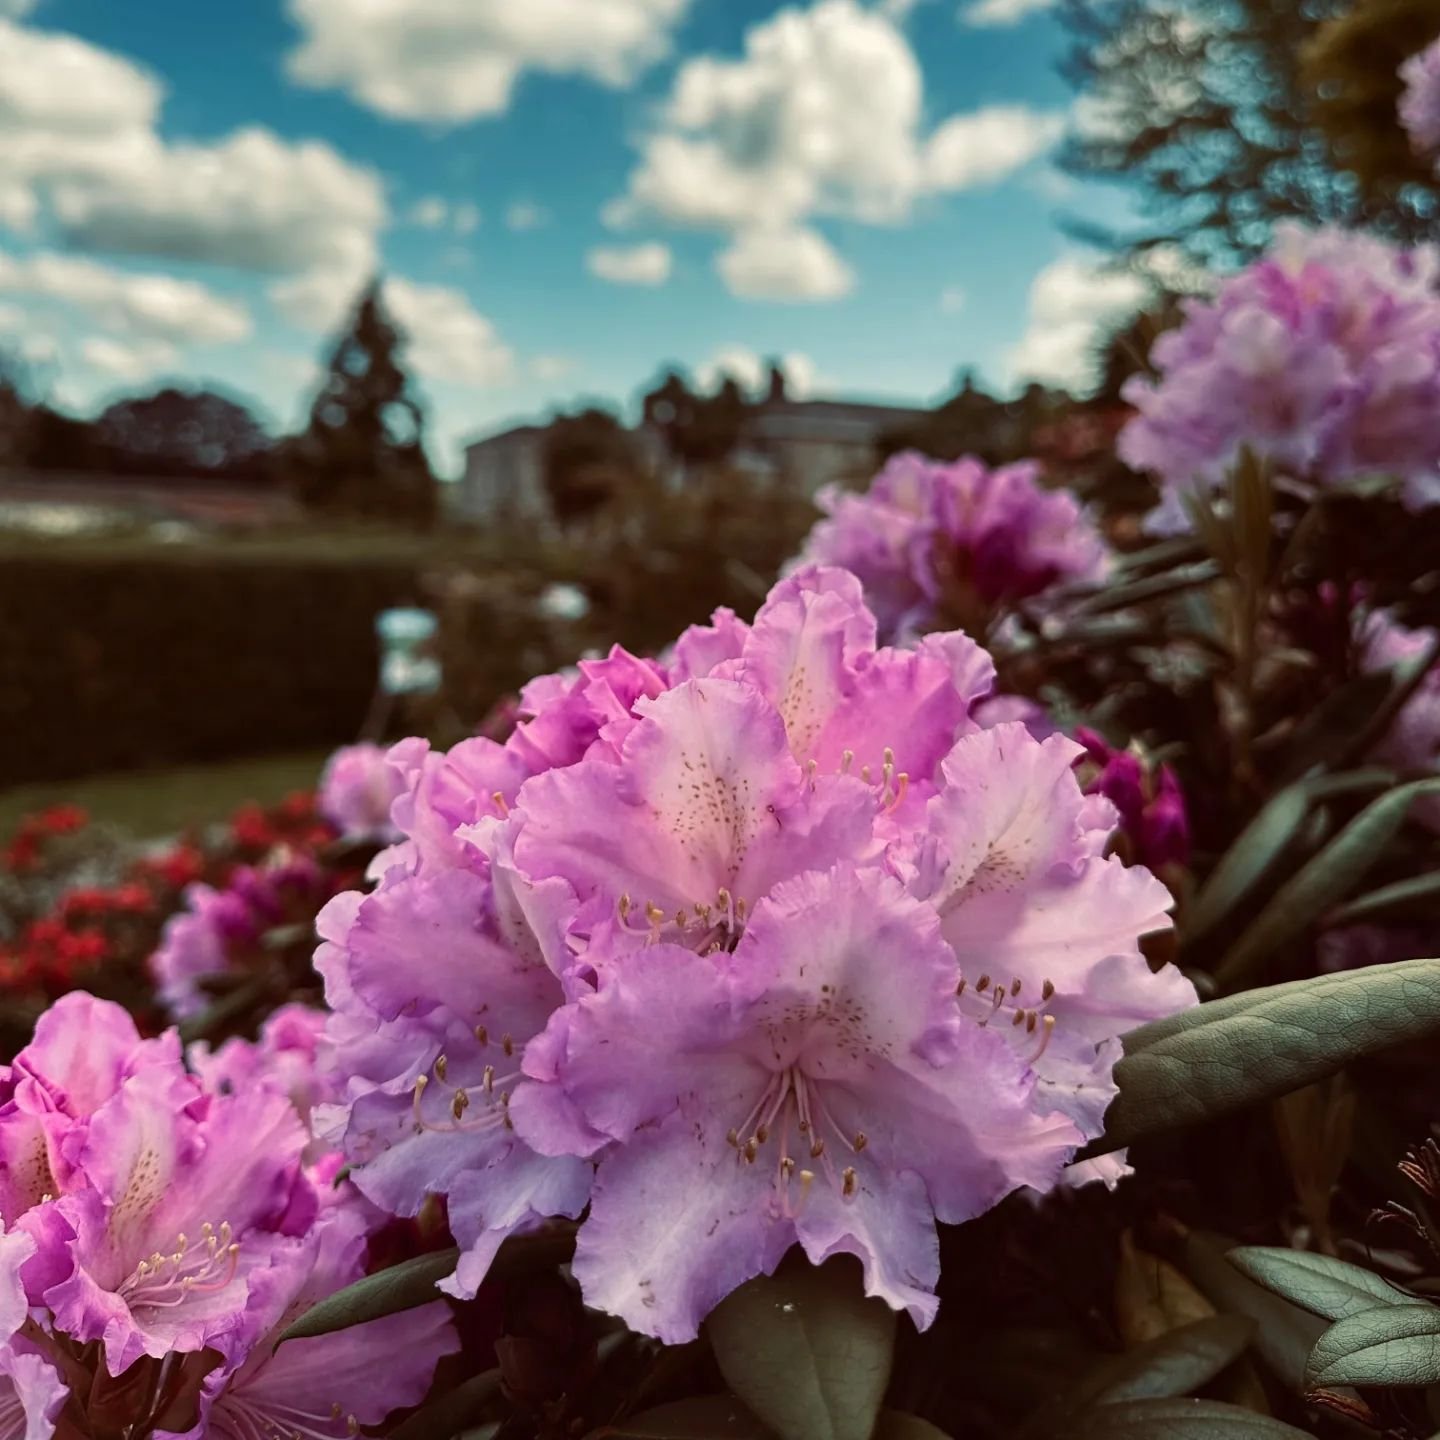 Bringing you a little pop of colour to brighten your day 🤗✨

#rhododendrons #rhododendroncelebration #leonardsleegardens #springvibes #popofcolour #horticulture #gardeninspo #beautifulblooms